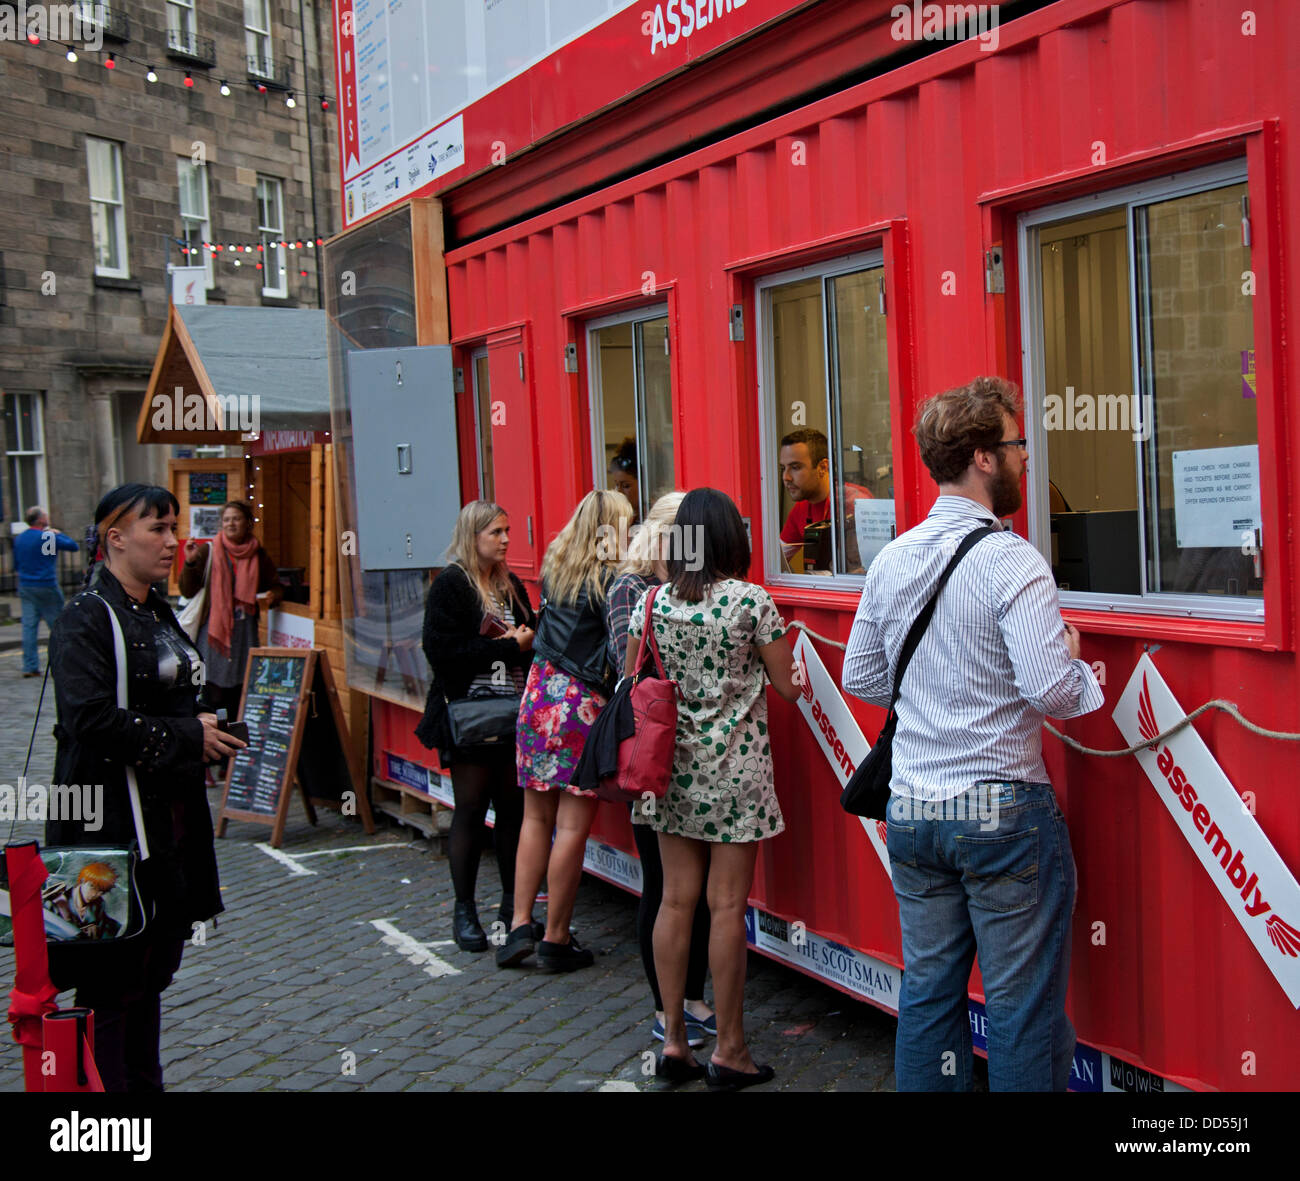 Edinburgh, UK. 26th Aug, 2013. Edinburgh Festival Fringe reports its highest ever recorded ticket sales at around One million nine hundred thousand that's up 5% from last year. These tickets were being purchased right up to the very last minute at the Assembly Box Office in George Square. Credit:  Arch White/Alamy Live News Stock Photo